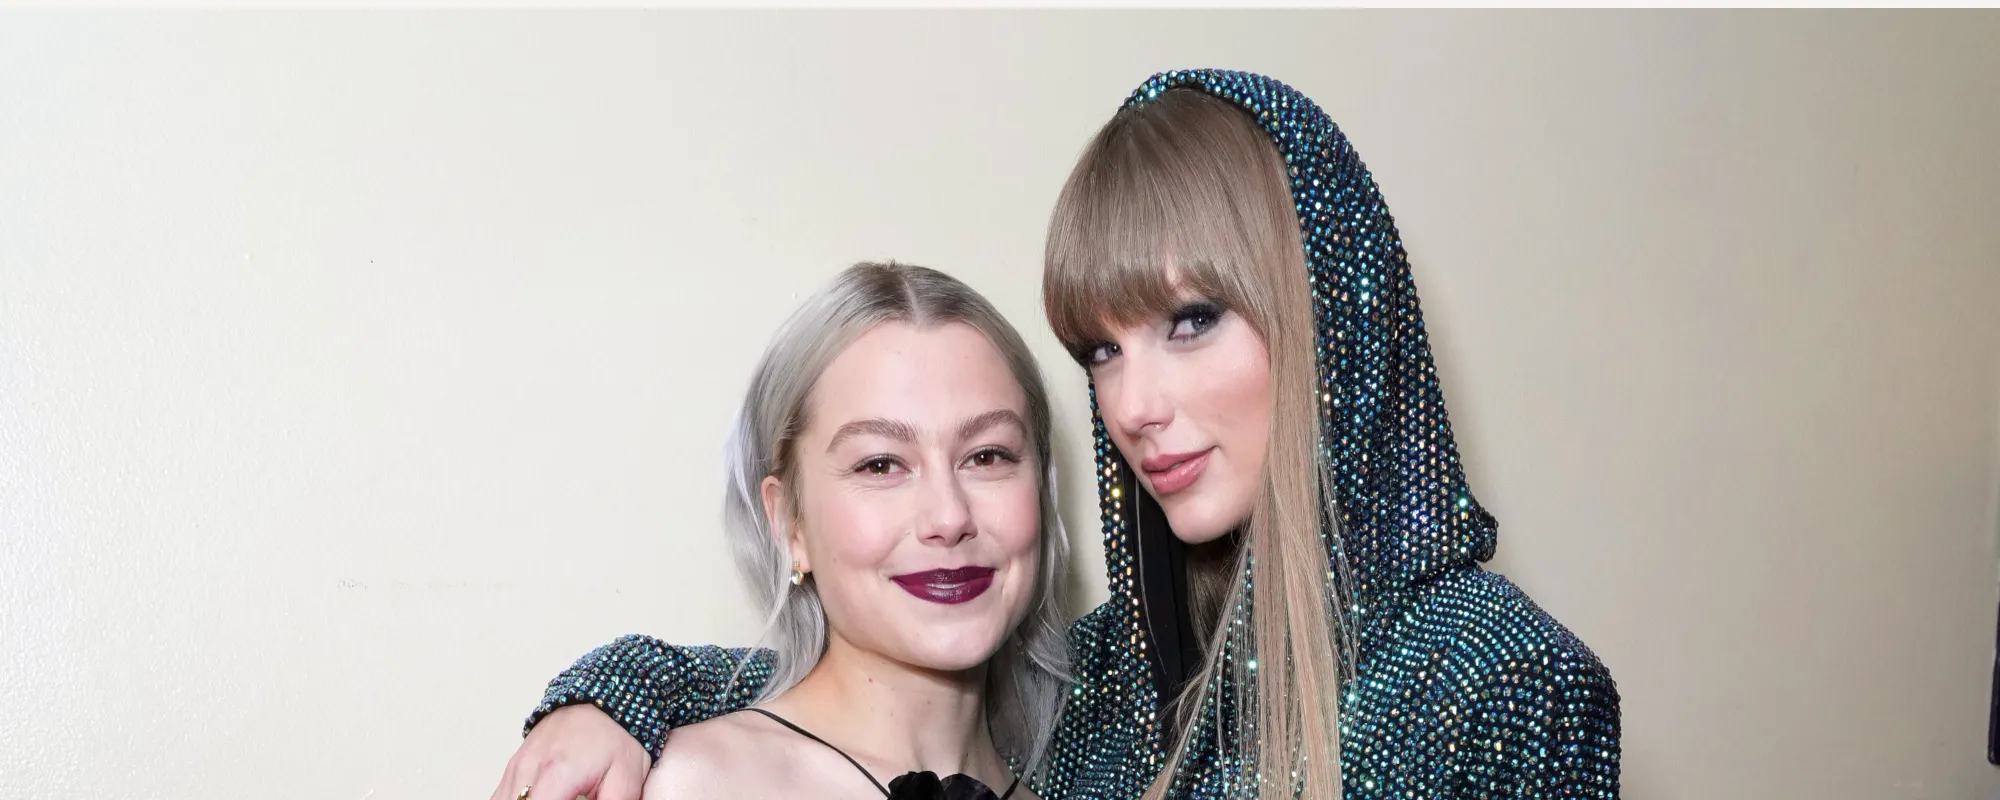 Phoebe Bridgers Lauds Taylor Swift at iHeart Radio Awards: “Taylor Has Always Told the Truth”